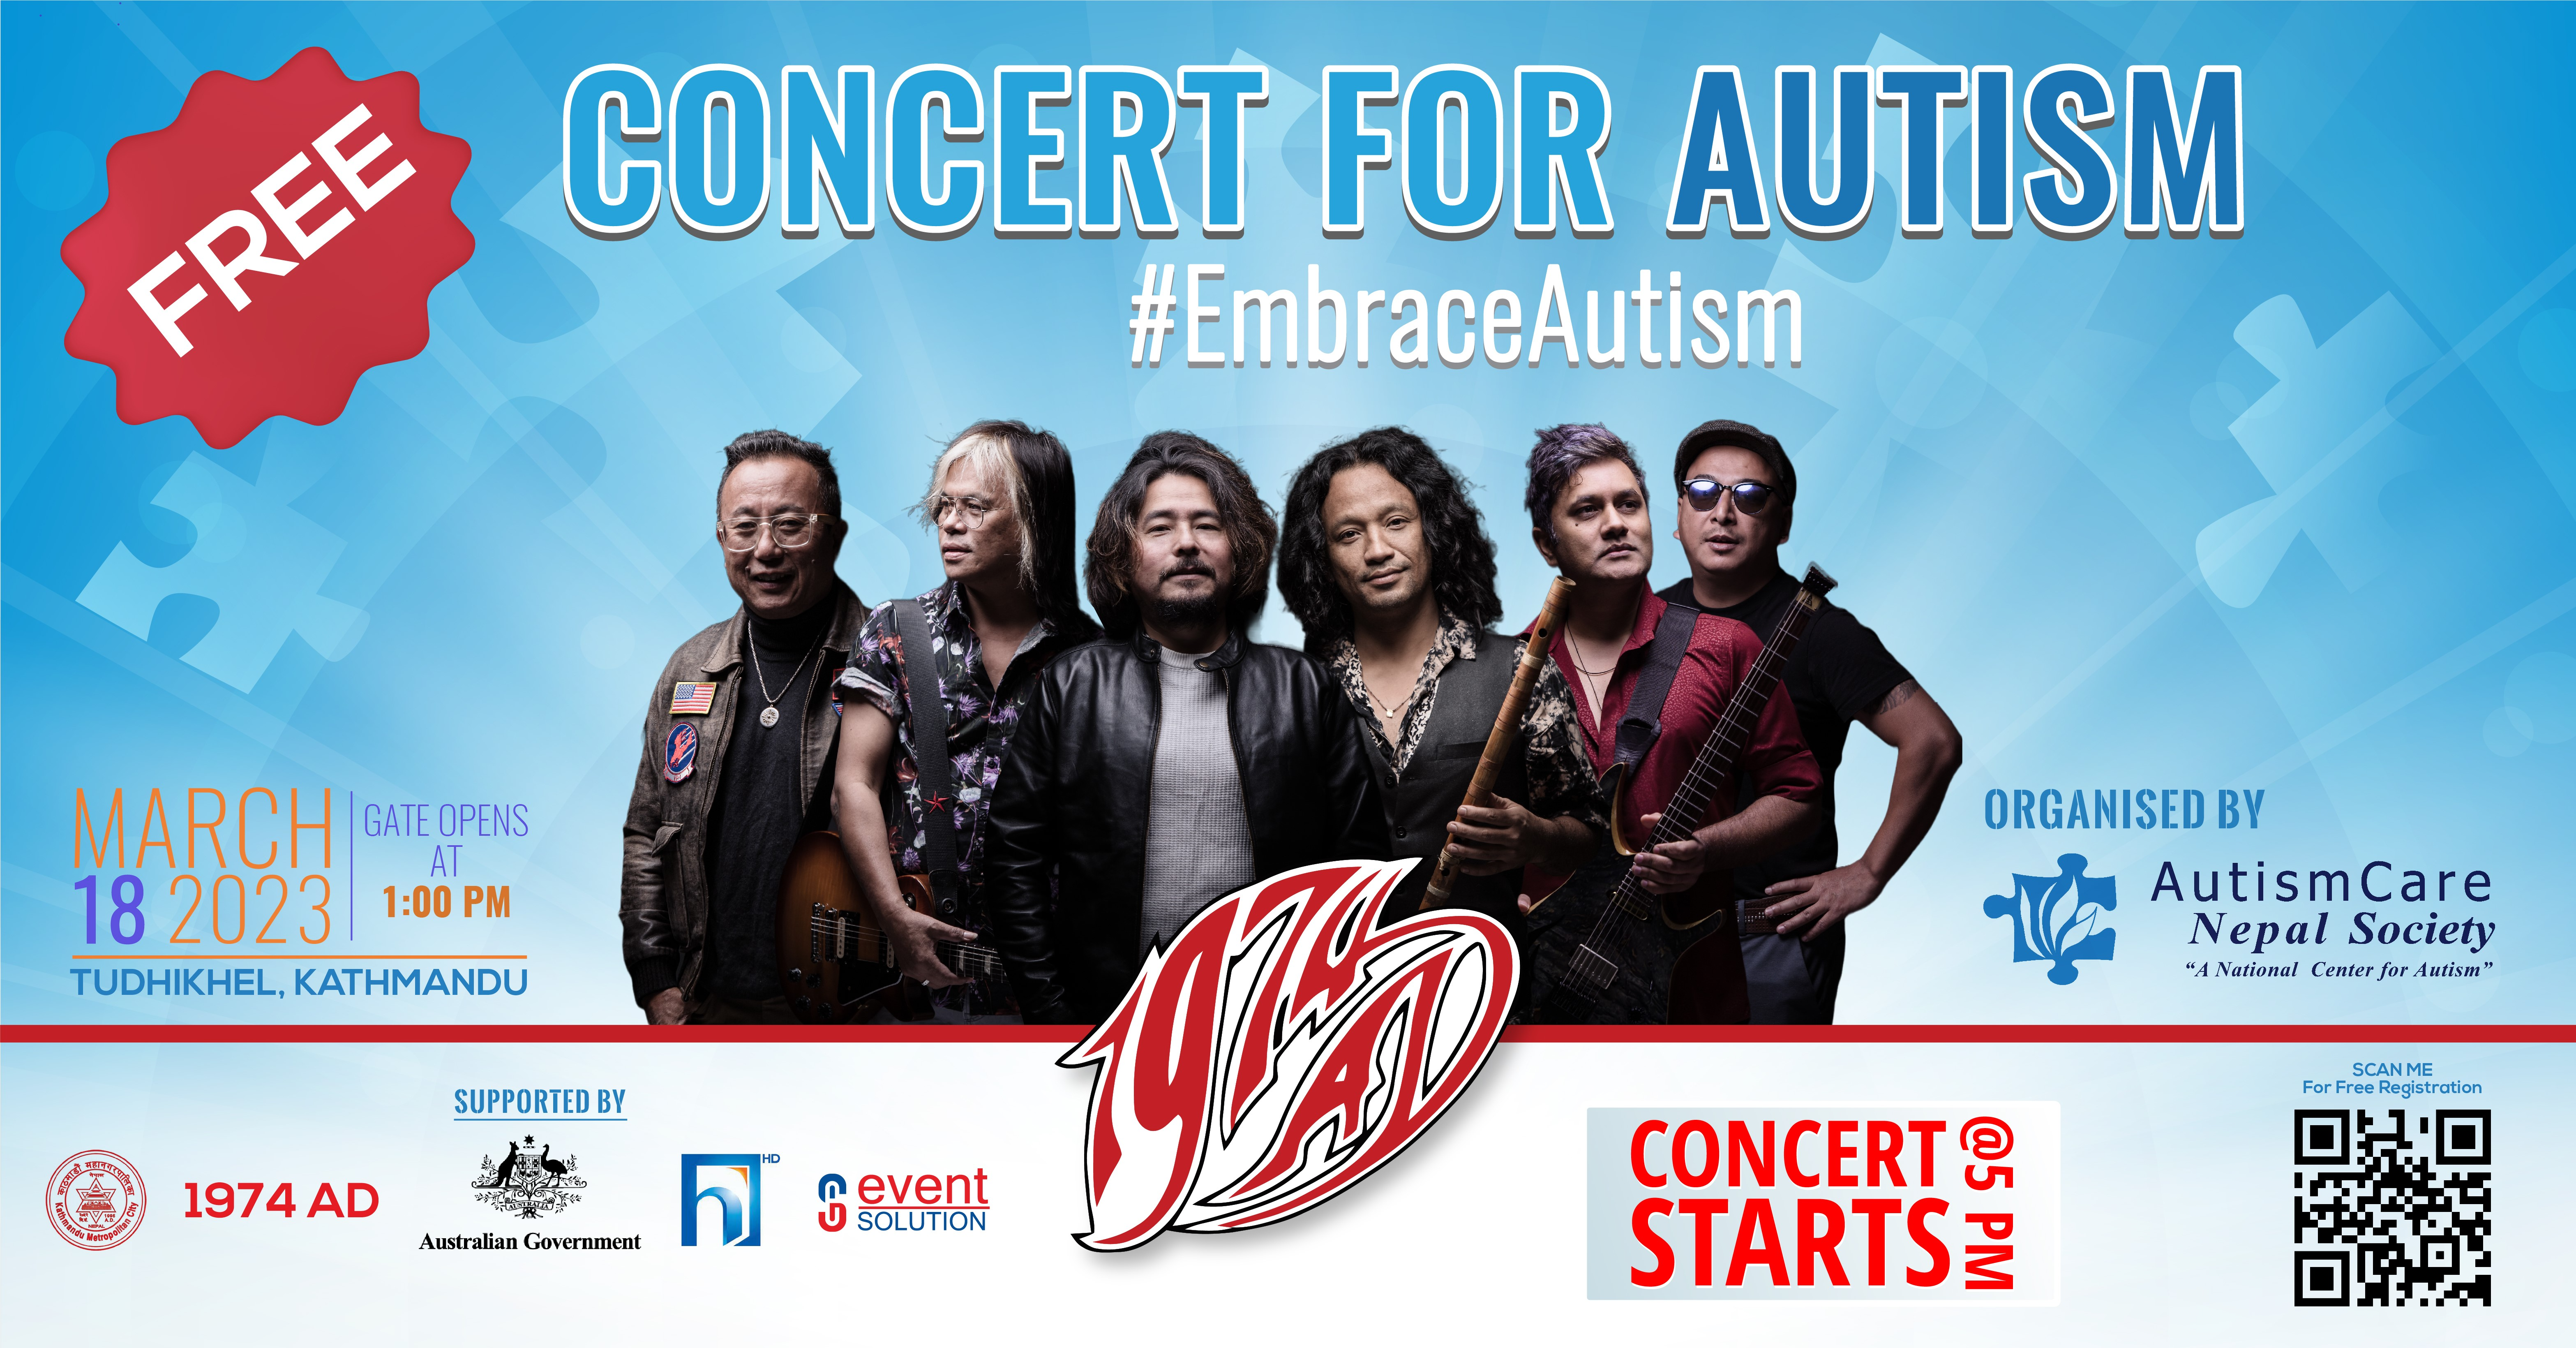 Australian government supports concert to Embrace Autism